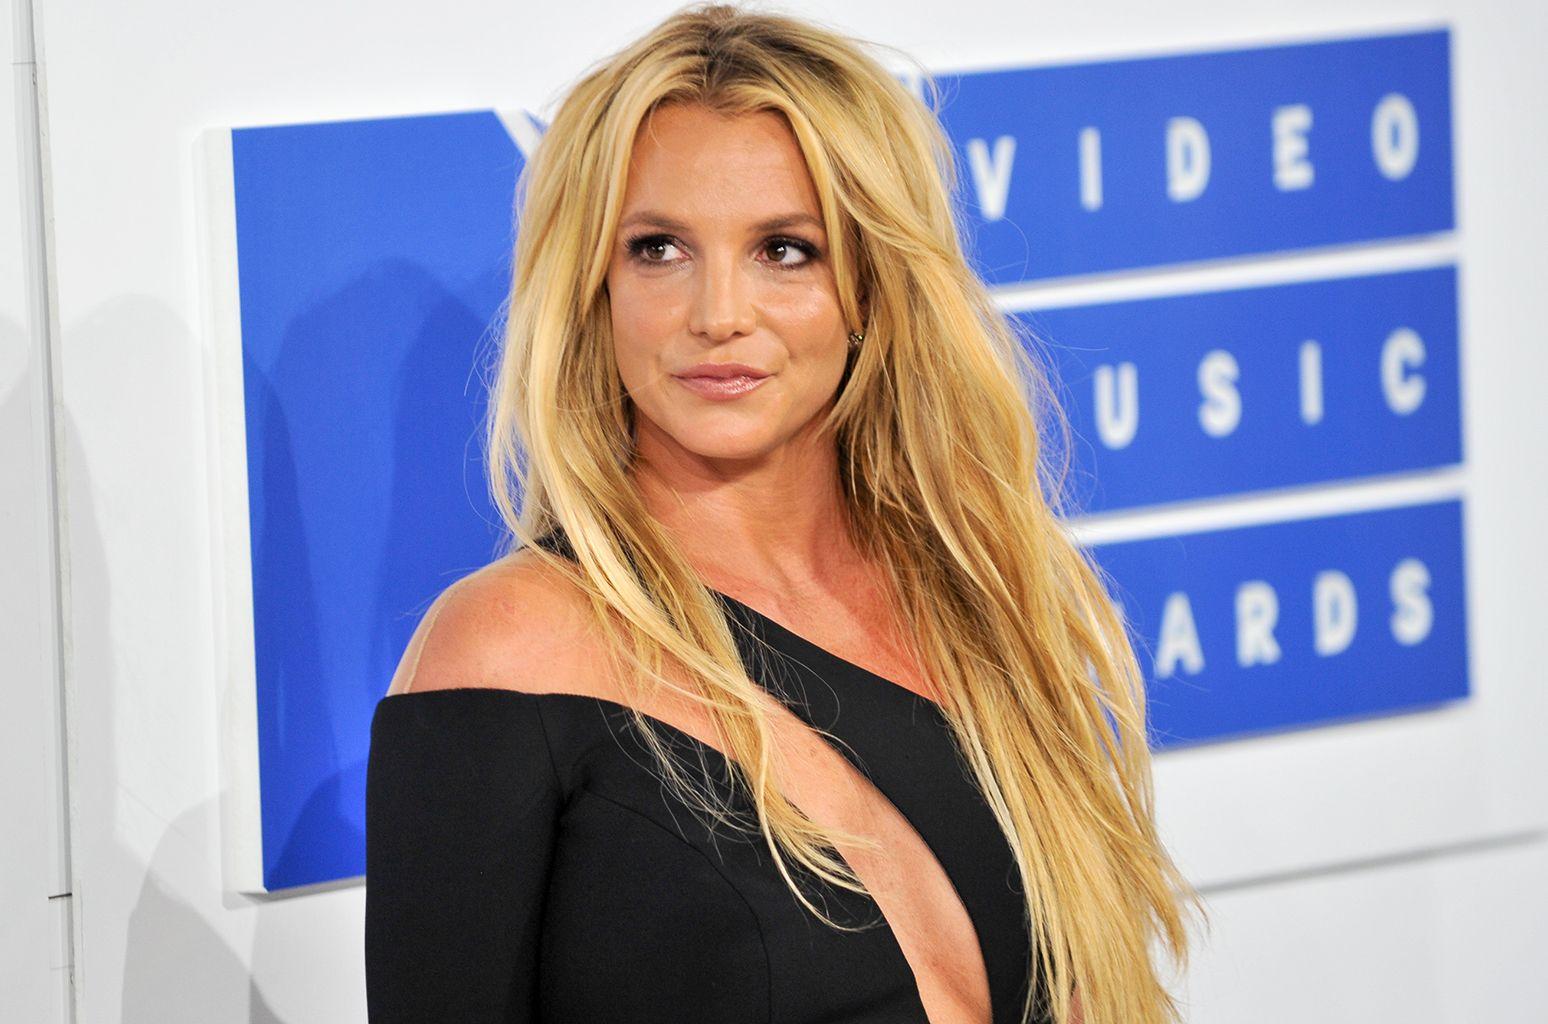 Beautiful Britney Spears HD Wallpaper, Photo & Image Download